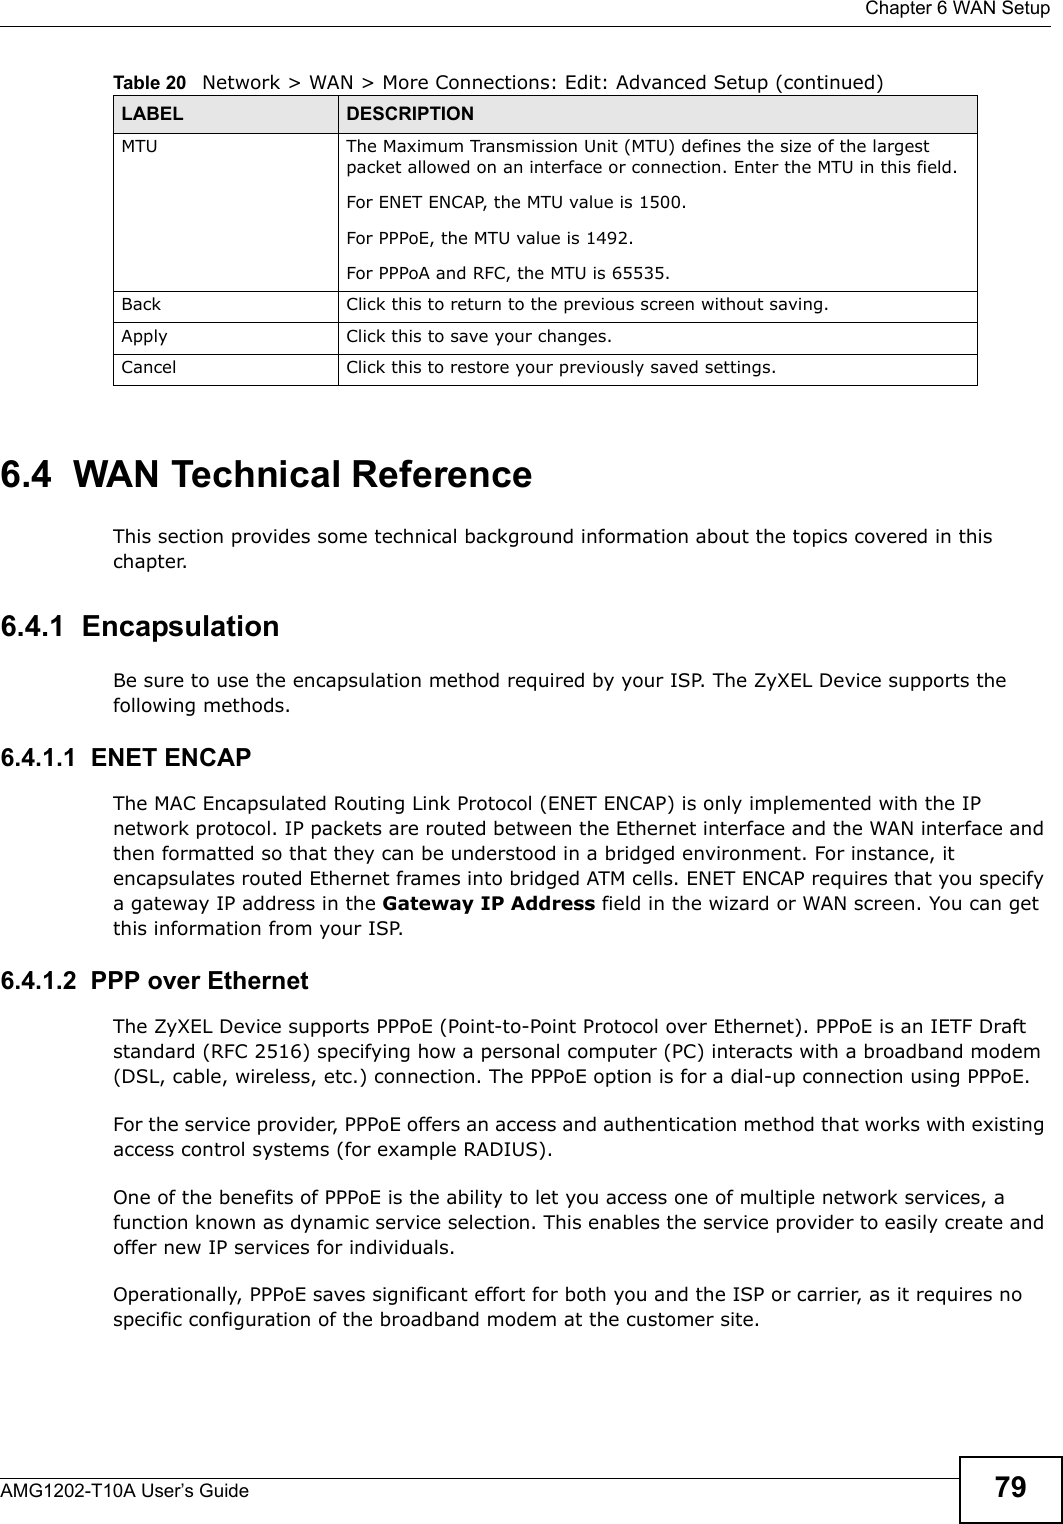  Chapter 6 WAN SetupAMG1202-T10A User’s Guide 796.4  WAN Technical ReferenceThis section provides some technical background information about the topics covered in this chapter.6.4.1  EncapsulationBe sure to use the encapsulation method required by your ISP. The ZyXEL Device supports the following methods.6.4.1.1  ENET ENCAPThe MAC Encapsulated Routing Link Protocol (ENET ENCAP) is only implemented with the IP network protocol. IP packets are routed between the Ethernet interface and the WAN interface and then formatted so that they can be understood in a bridged environment. For instance, it encapsulates routed Ethernet frames into bridged ATM cells. ENET ENCAP requires that you specify a gateway IP address in the Gateway IP Address field in the wizard or WAN screen. You can get this information from your ISP.6.4.1.2  PPP over EthernetThe ZyXEL Device supports PPPoE (Point-to-Point Protocol over Ethernet). PPPoE is an IETF Draft standard (RFC 2516) specifying how a personal computer (PC) interacts with a broadband modem (DSL, cable, wireless, etc.) connection. The PPPoE option is for a dial-up connection using PPPoE.For the service provider, PPPoE offers an access and authentication method that works with existing access control systems (for example RADIUS).One of the benefits of PPPoE is the ability to let you access one of multiple network services, a function known as dynamic service selection. This enables the service provider to easily create and offer new IP services for individuals.Operationally, PPPoE saves significant effort for both you and the ISP or carrier, as it requires no specific configuration of the broadband modem at the customer site.MTU The Maximum Transmission Unit (MTU) defines the size of the largest packet allowed on an interface or connection. Enter the MTU in this field.For ENET ENCAP, the MTU value is 1500.For PPPoE, the MTU value is 1492.For PPPoA and RFC, the MTU is 65535.Back Click this to return to the previous screen without saving.Apply Click this to save your changes. Cancel Click this to restore your previously saved settings.Table 20   Network &gt; WAN &gt; More Connections: Edit: Advanced Setup (continued)LABEL DESCRIPTION